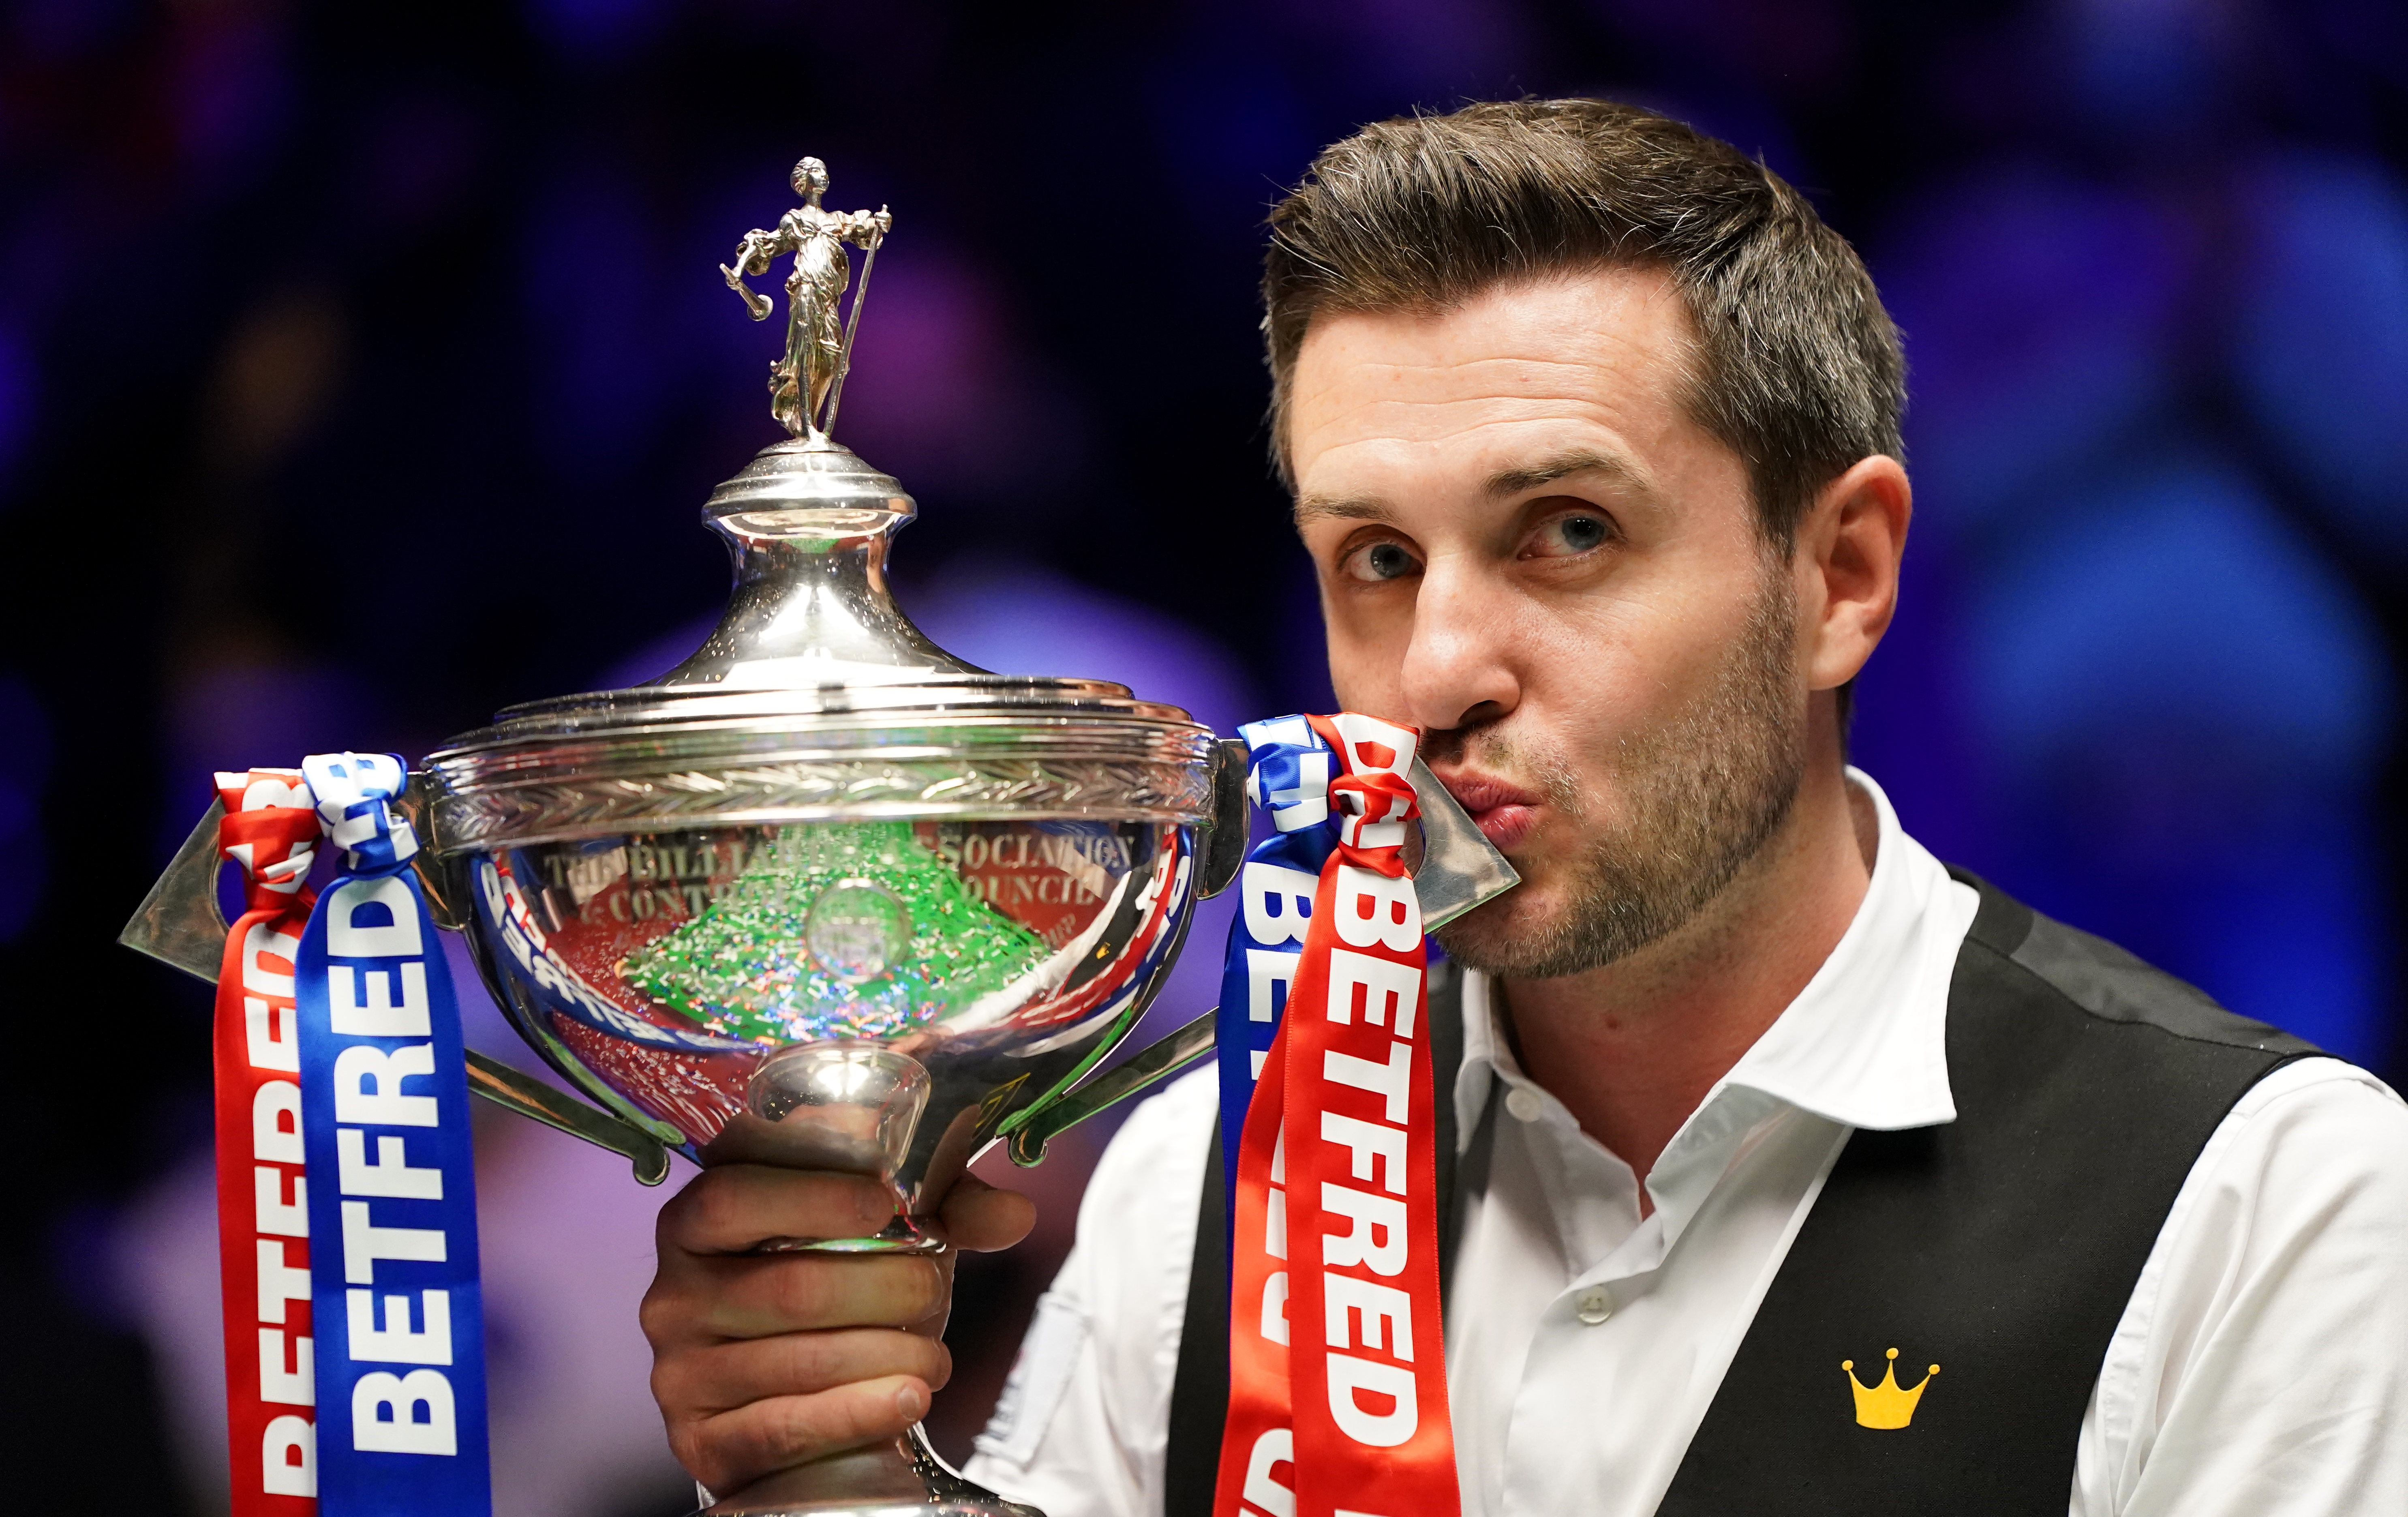 2022 World Snooker Championship Qualifiers Draw, schedule, prize money and TV channel